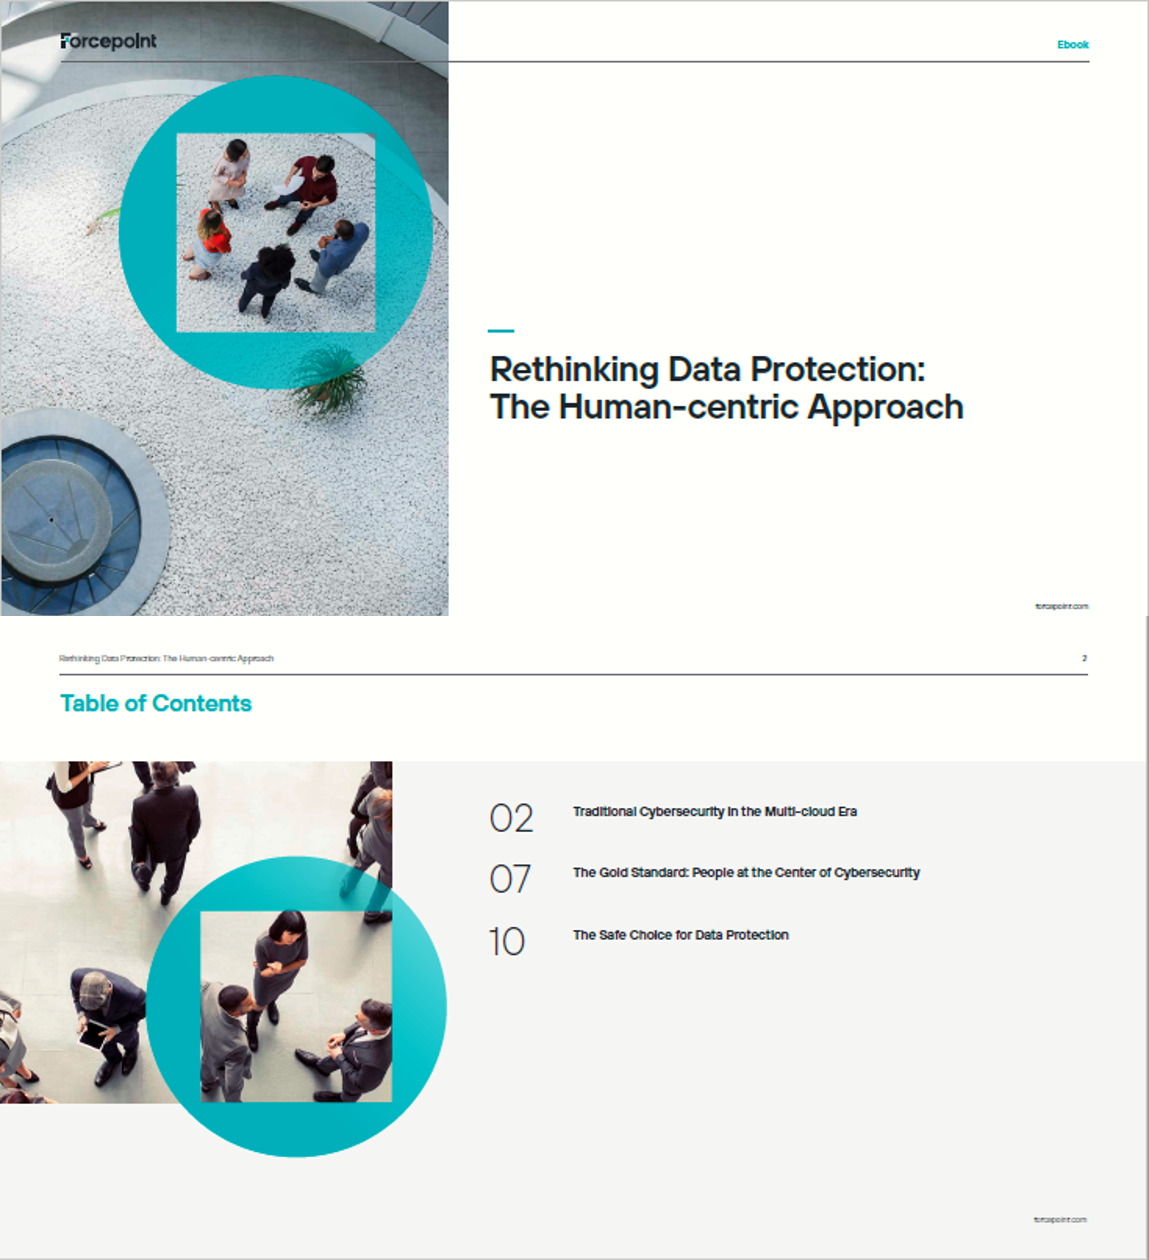 Rethinking Data Protection: The Human-centric Approach